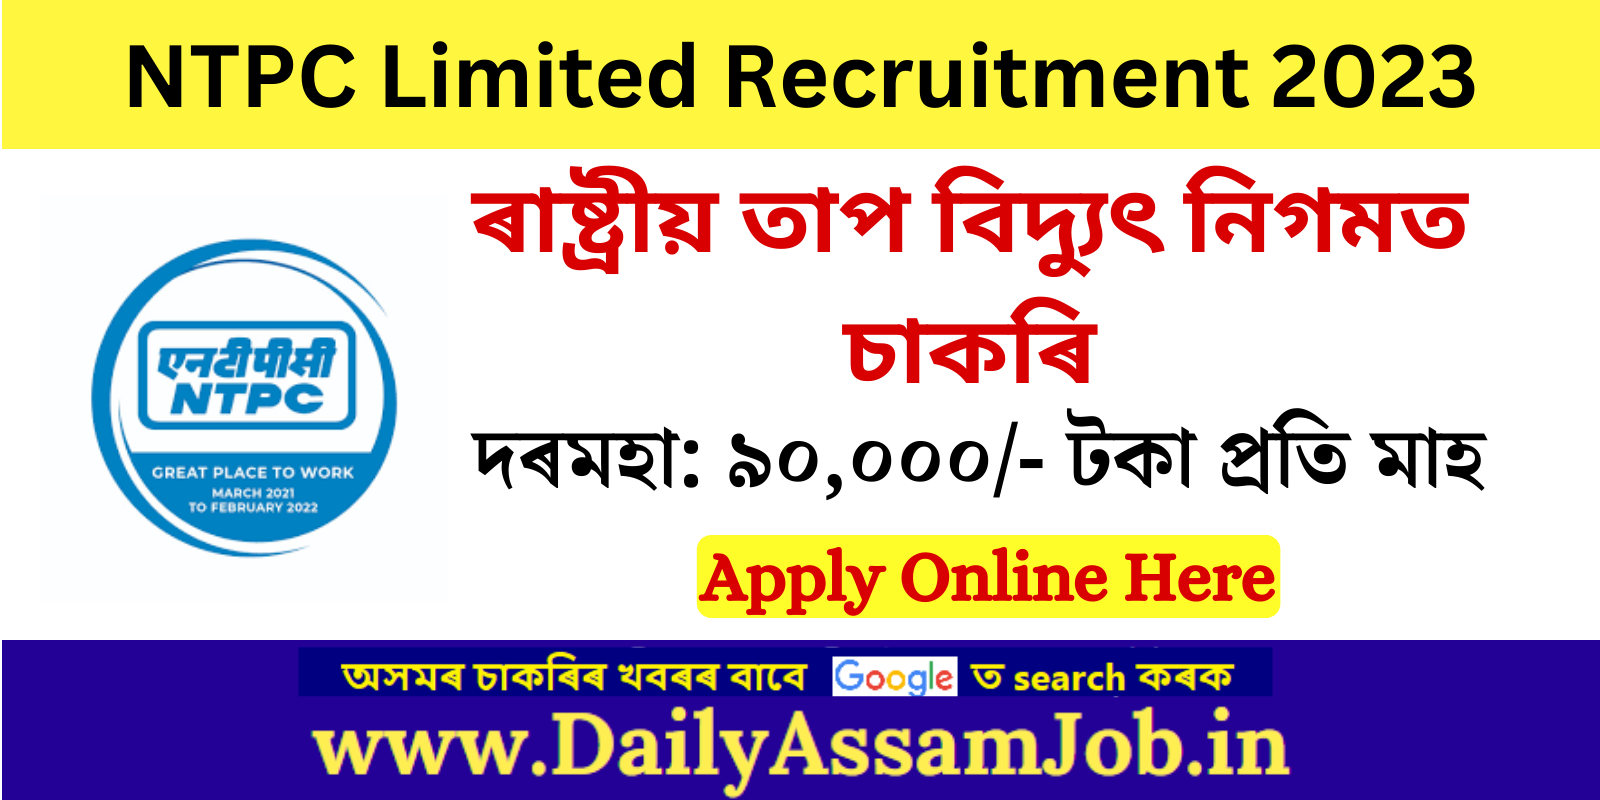 Assam Career :: NTPC Limited Recruitment 2023 for Executive Vacancy